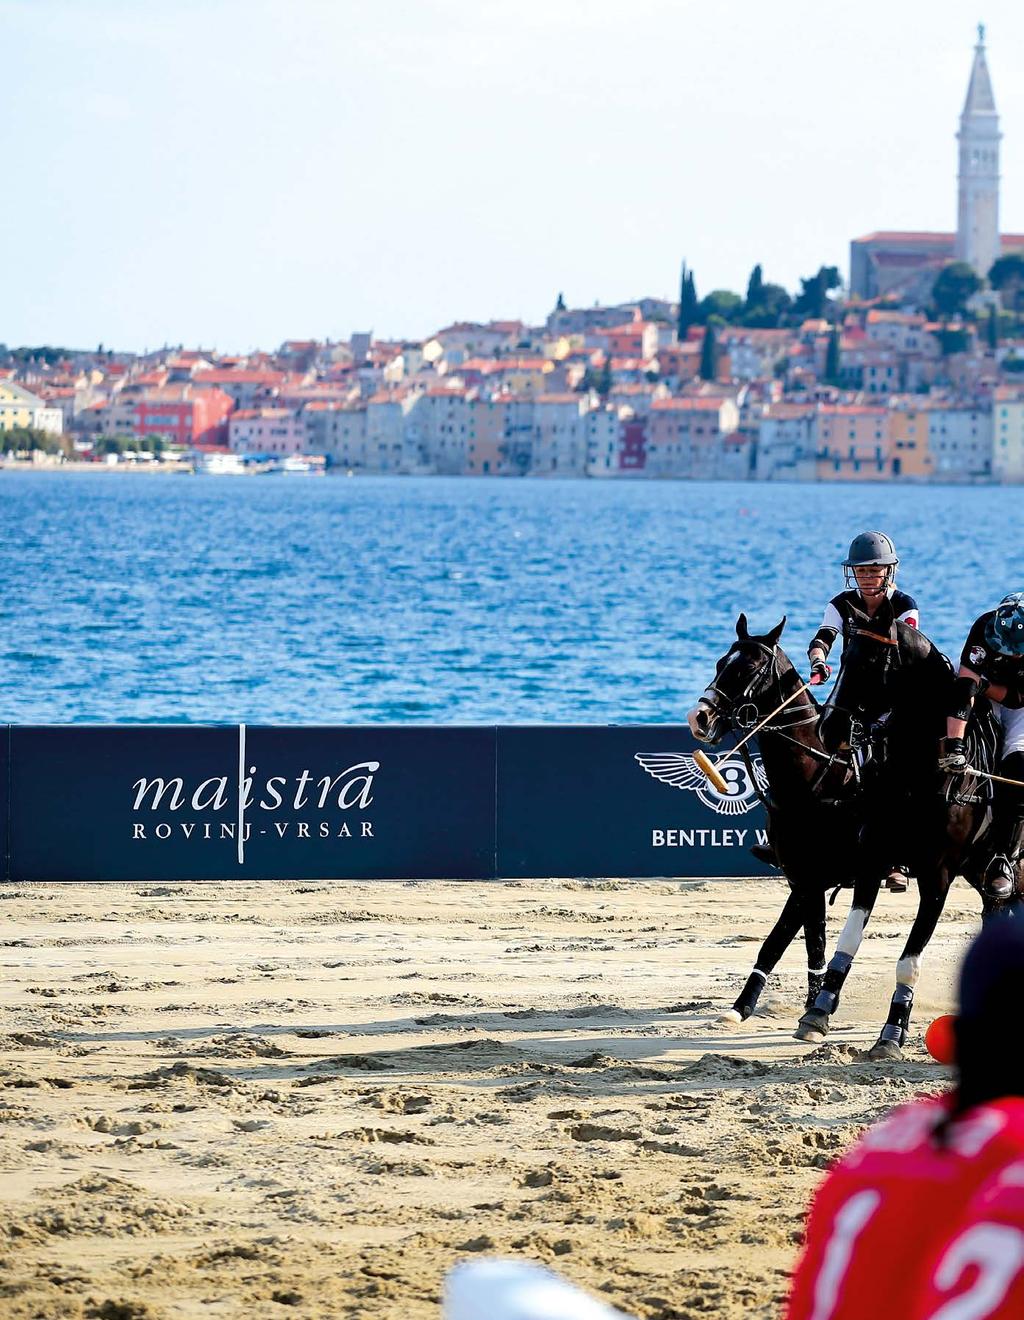 10 PROGRAMME ROVINJ BEACH POLO CUP 2018 POLO +10 POLO +10 ROVINJ BEACH POLO CUP 2018 PROGRAMME 11 PROGRAMME TIMETABLE THURSDAY, 7 TH JUNE 2018 7:30 11:00 pm Welcome Party *By invitation only!